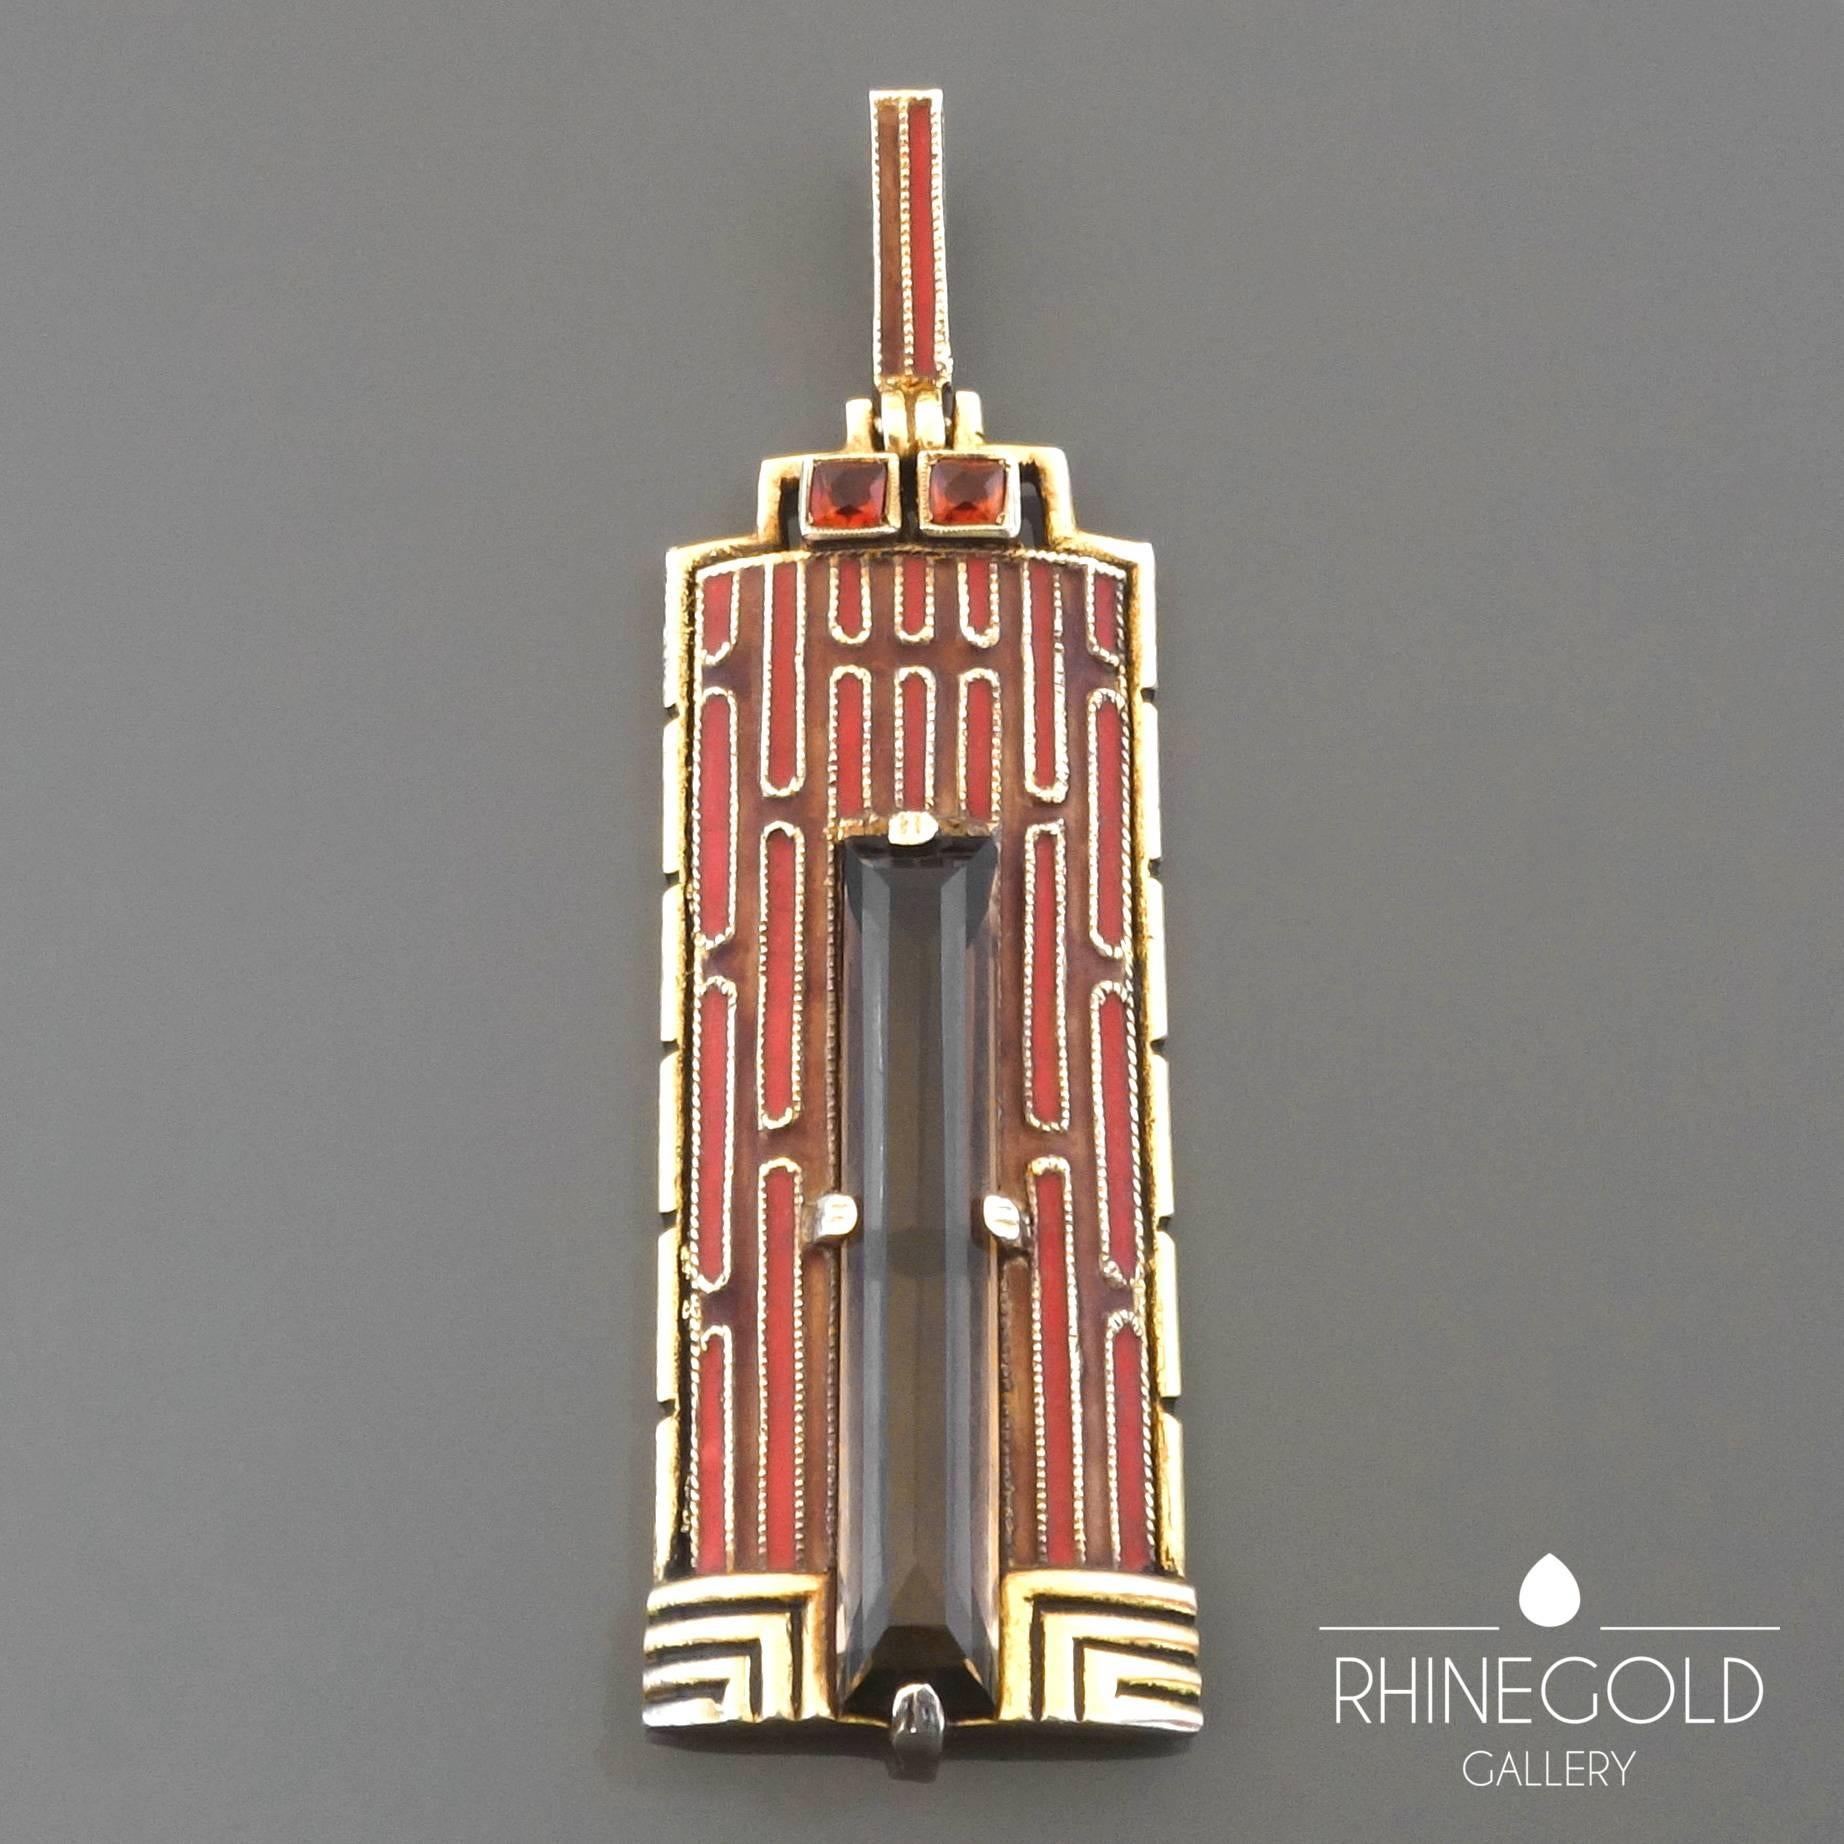 1920s Theodor Fahrner Art Deco Large Enamel Smoky Quartz Citrine Gilt Silver Pendant
Gilt silver, smoky quarz (approx. 7.5 to 8 carats), 2 citrines, matte enamel in red and cinnamon brown
Height 7.0 cm (approx. 2 3/4"), width 2.1 cm (approx.